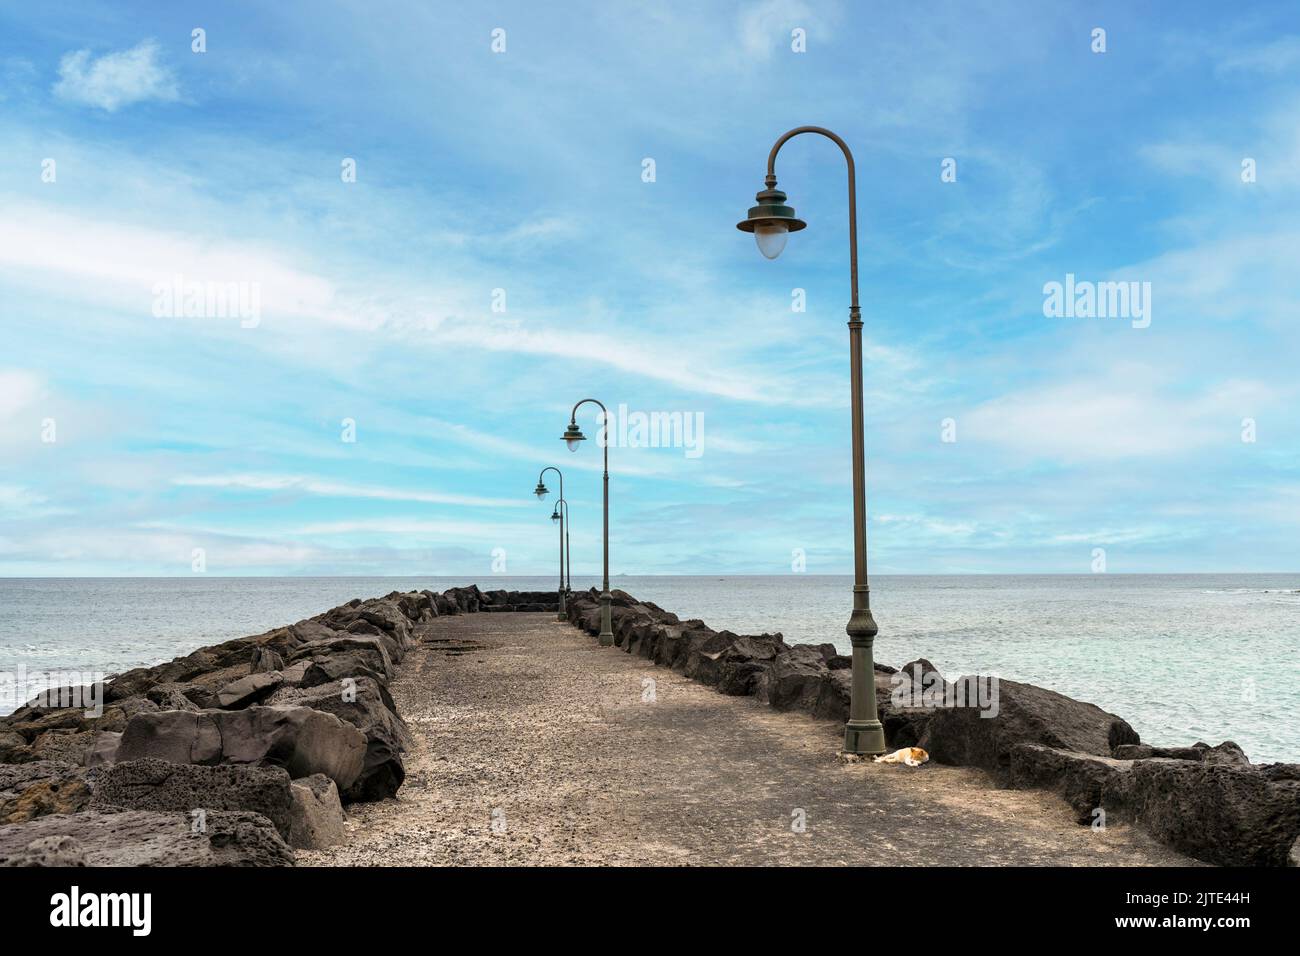 Minimalistic pier with lanterns in Costa Teguise in Lanzarote, Canary Island, Spain Stock Photo